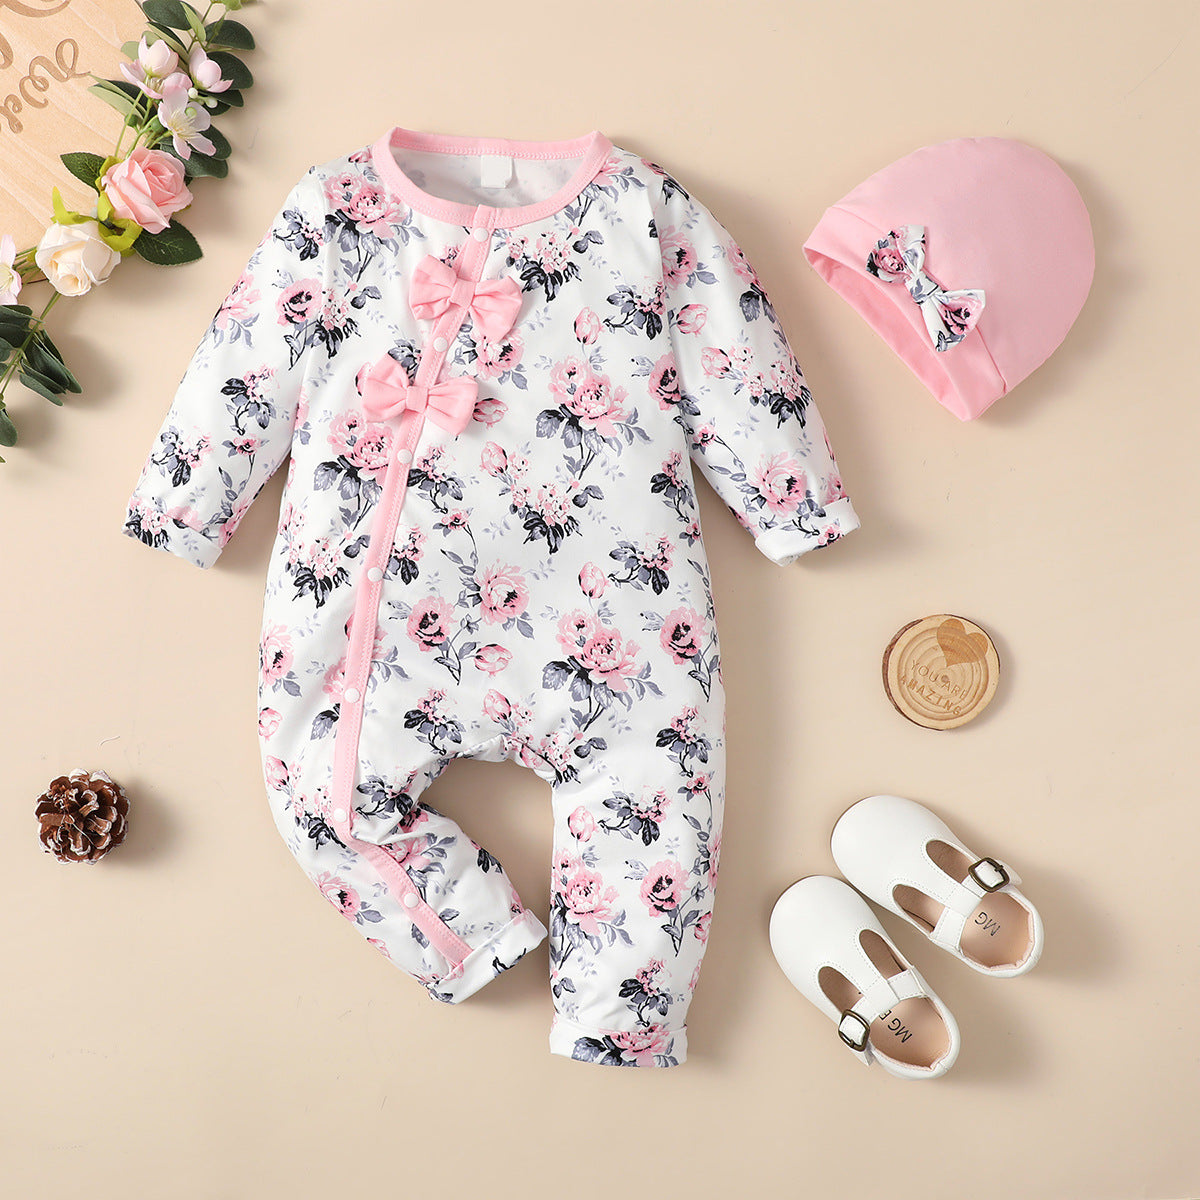 Infant Toddler One-piece Floral Baby Girl Jumpsuit